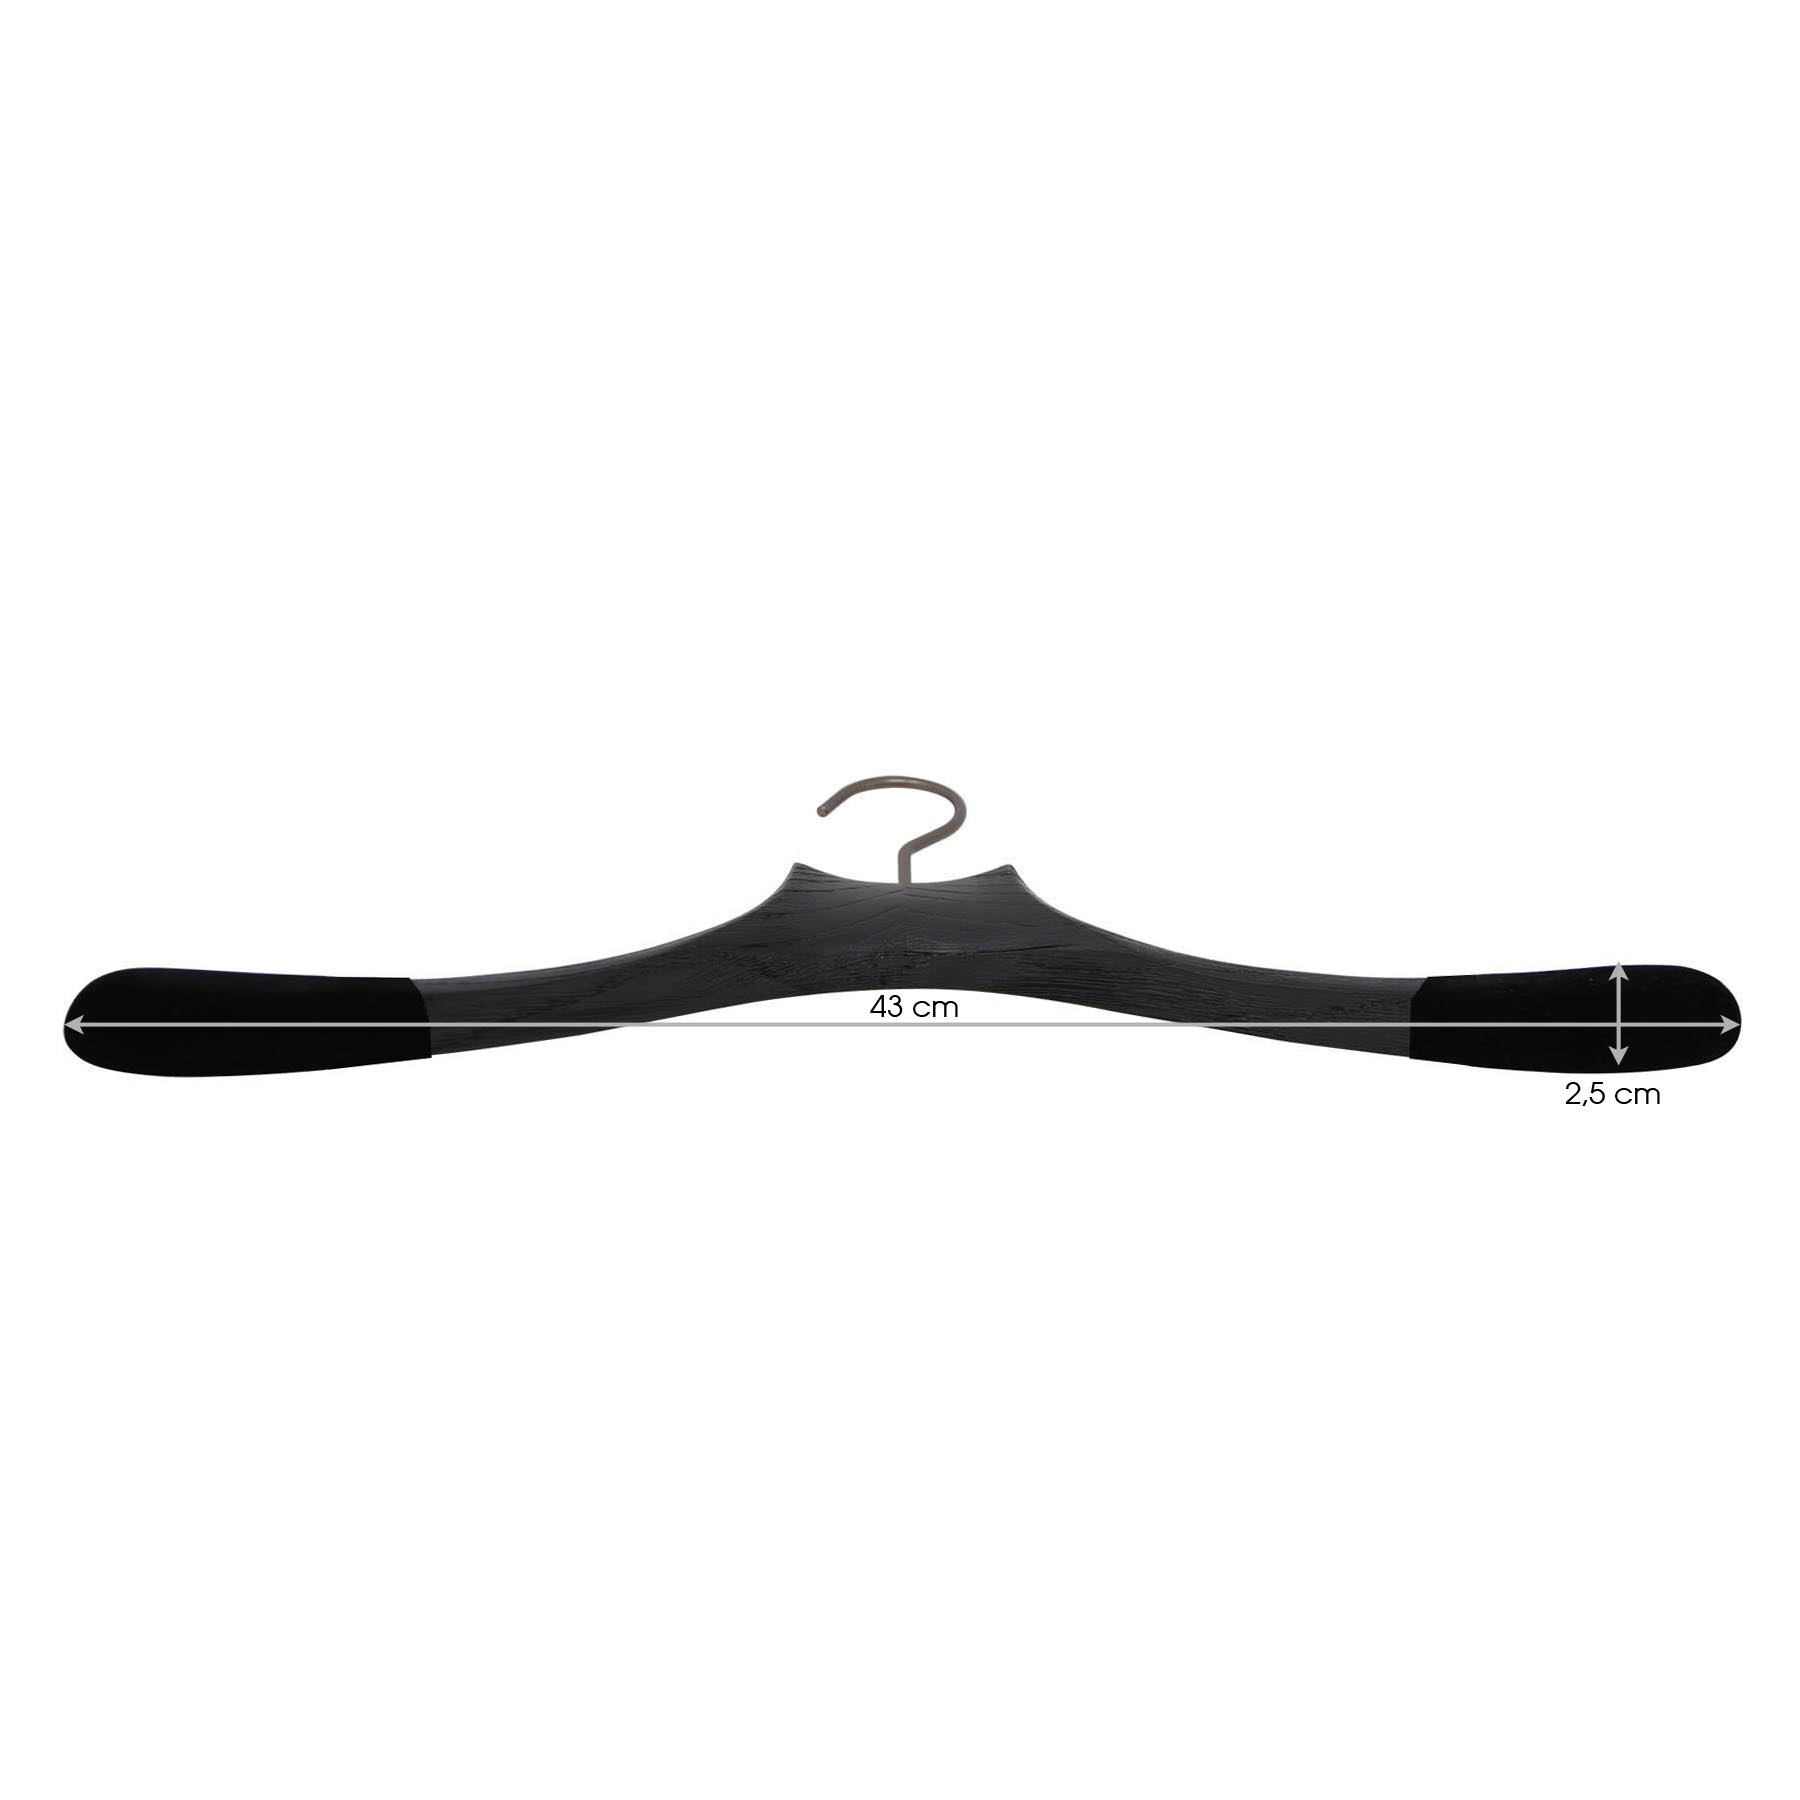 black wooden hanger for shirt, width 1.9 inches